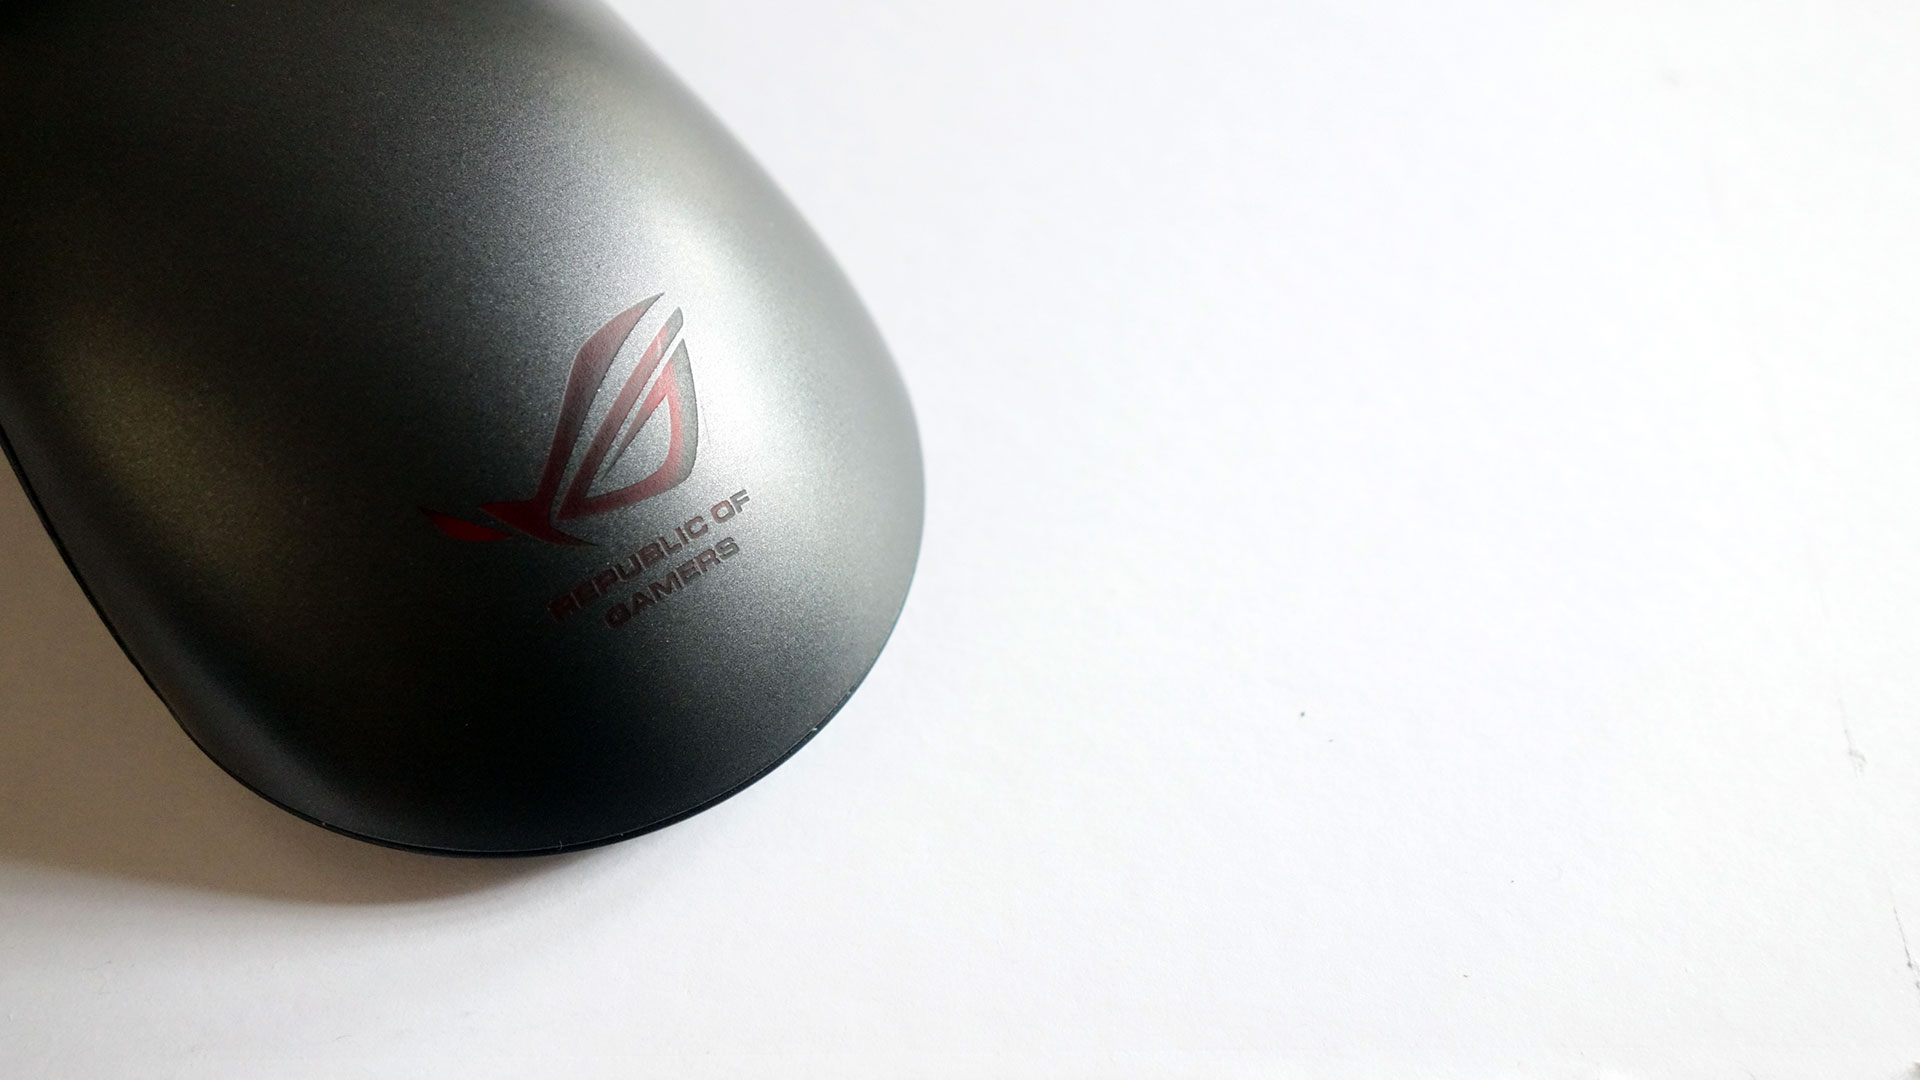 asus-rog-gladius-mouse-review-03